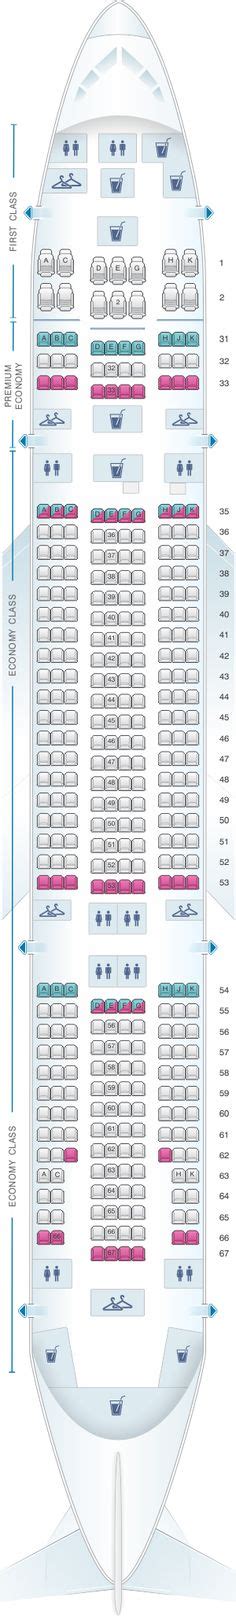 Boeing 777 300er Turkish Airlines Seating Map